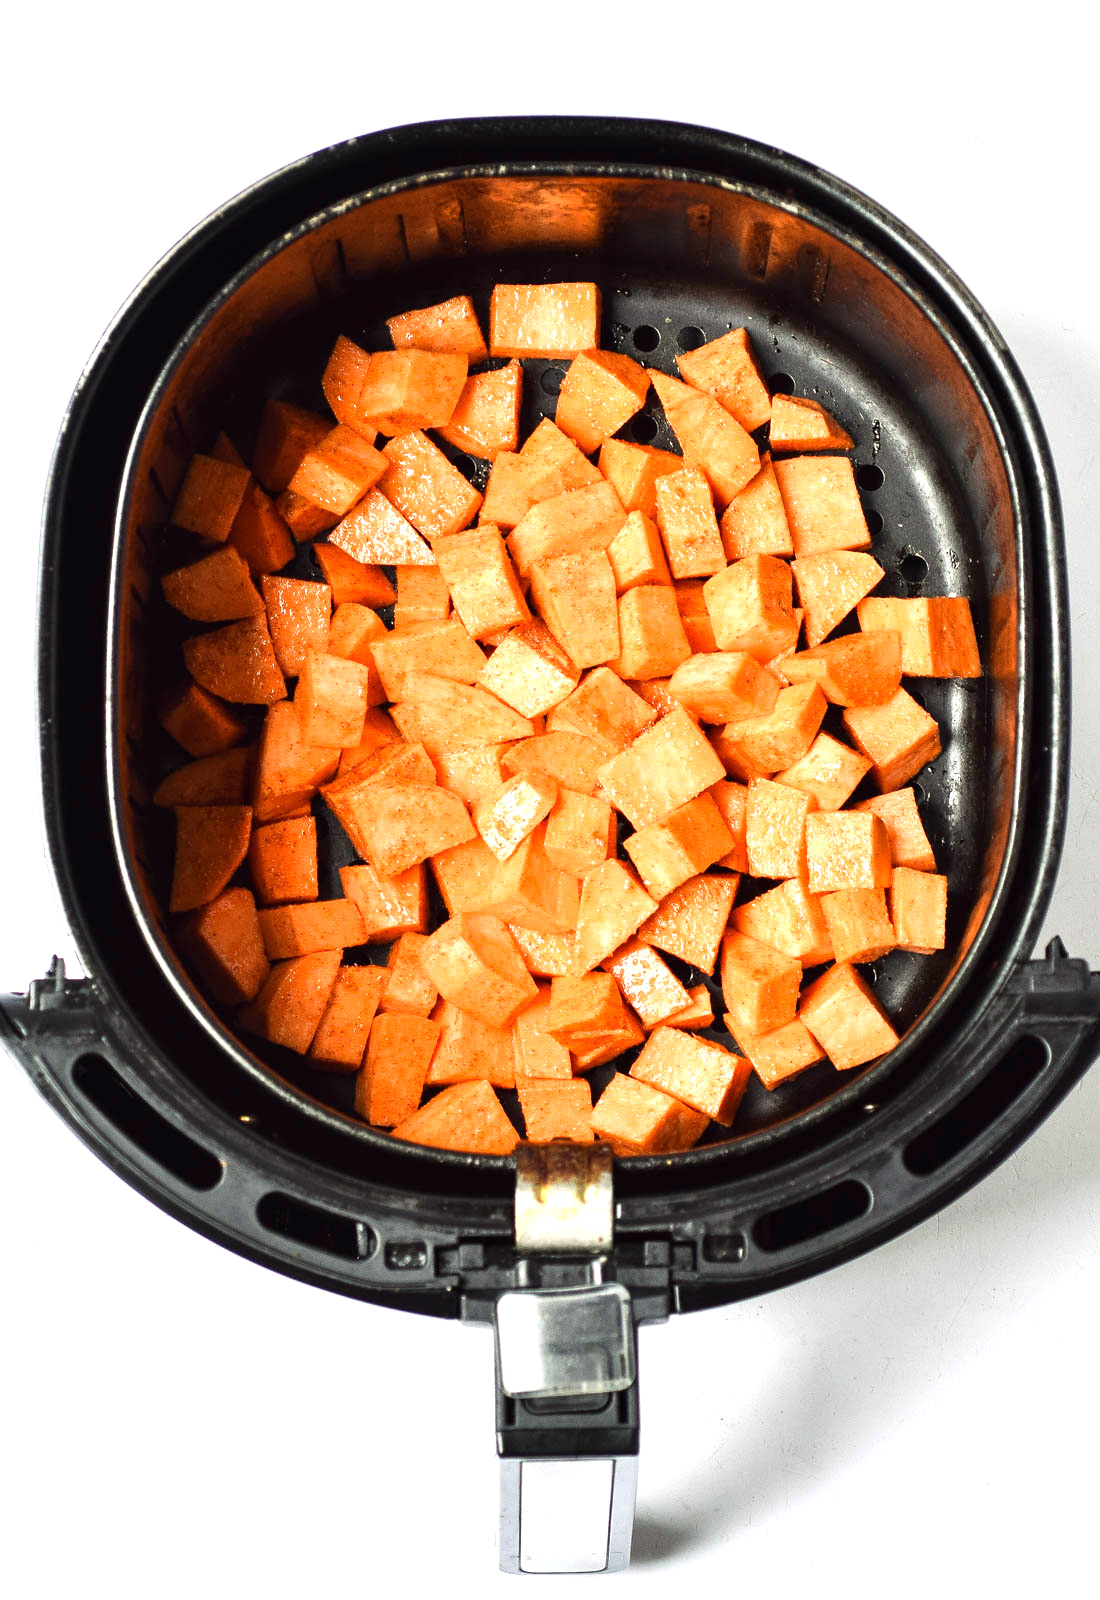 cubed sweet potatoes in air fryer before cooking